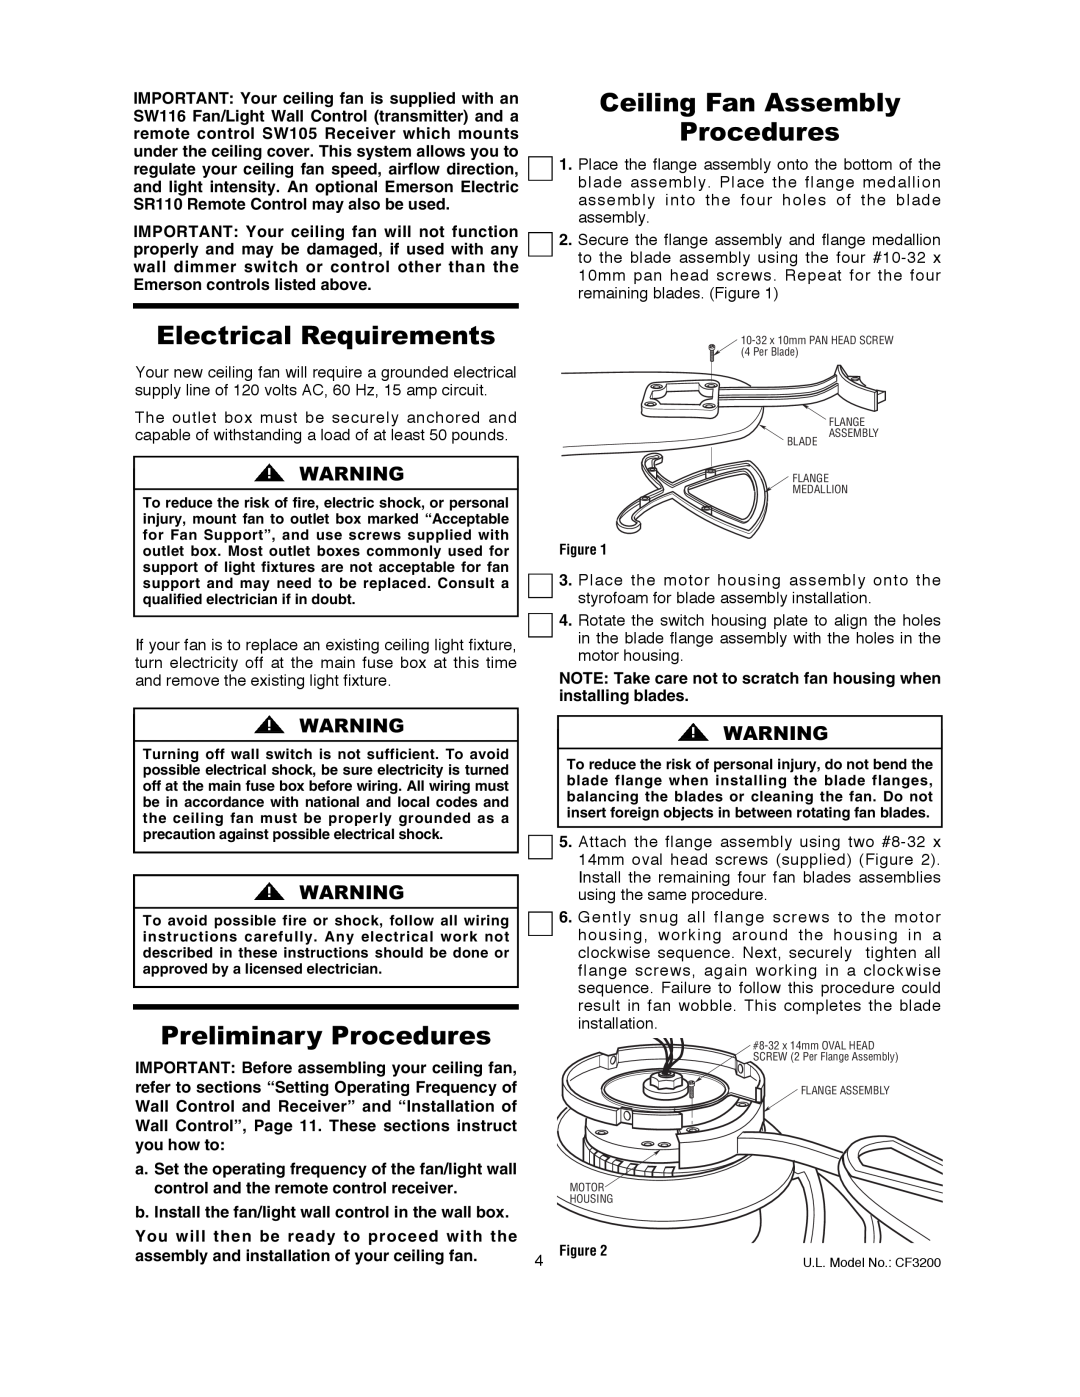 Emerson CF3200AWL00 owner manual Electrical Requirements, Ceiling Fan Assembly Procedures, Preliminary Procedures 